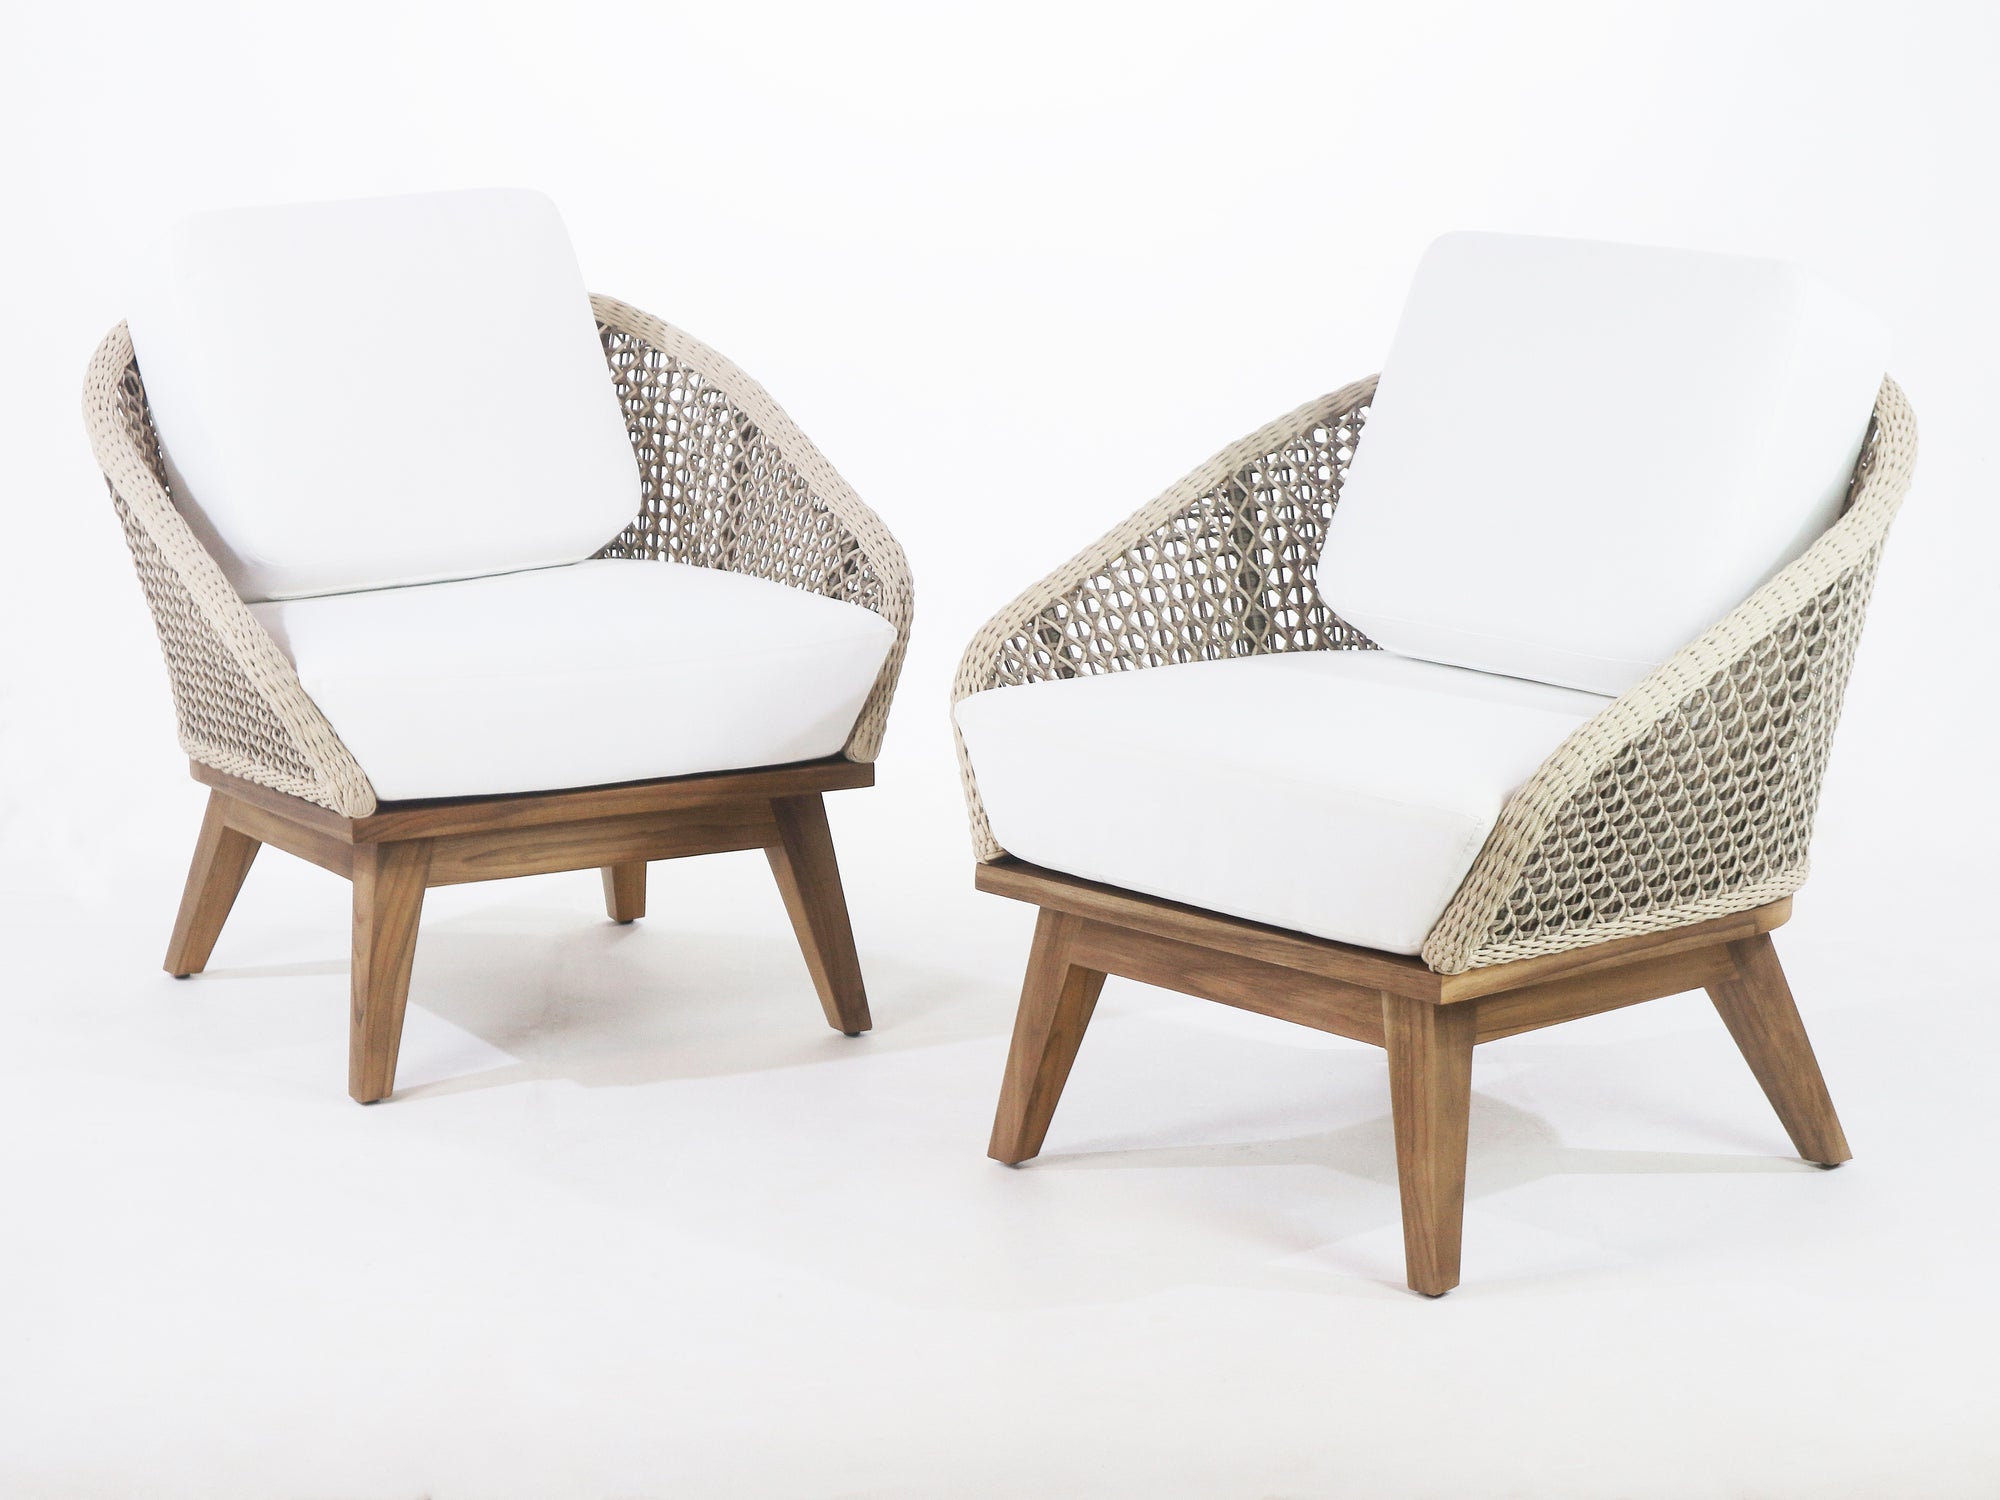 Surakarta Outdoor Accent Chair with UV protected outdoor weaving